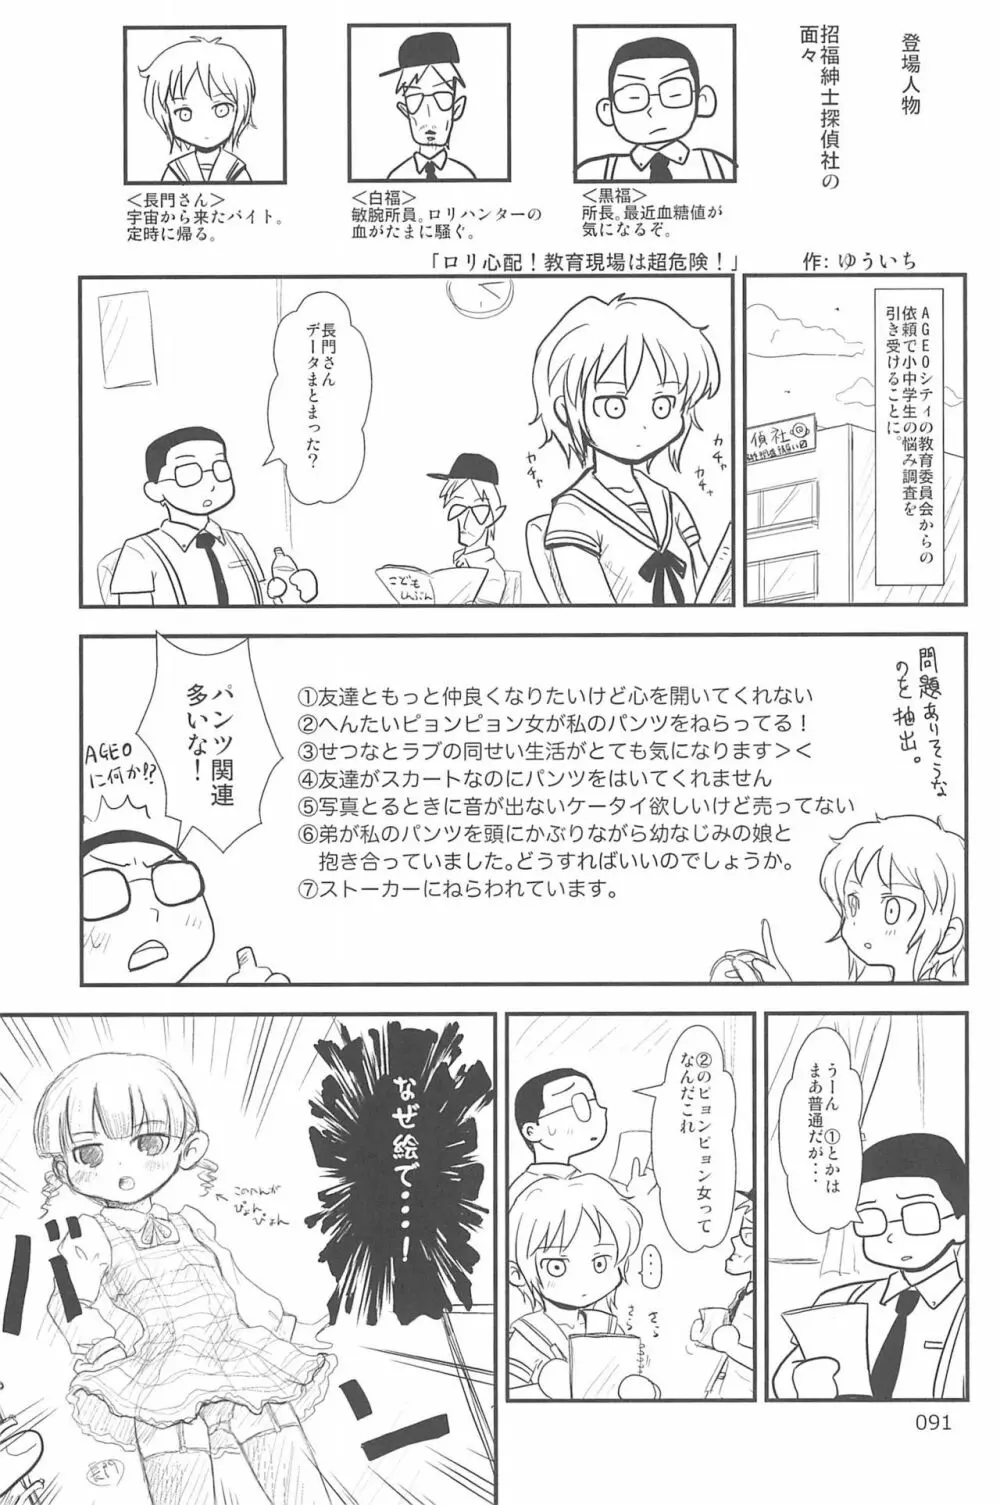 ND-special Volume 6 91ページ